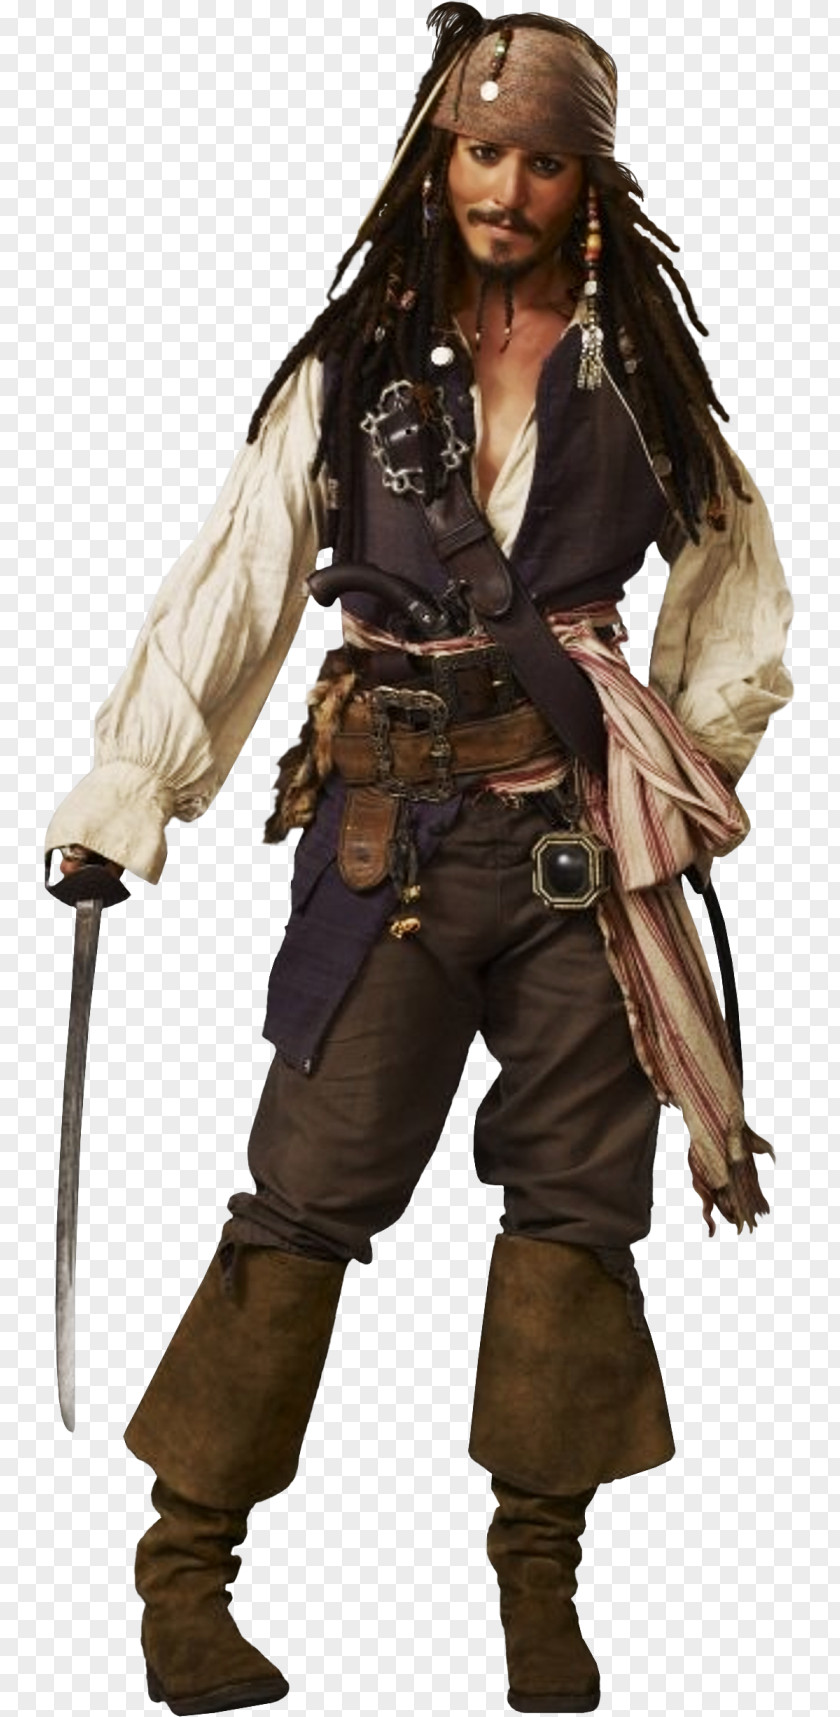 Pirate Jack Sparrow Pirates Of The Caribbean: Curse Black Pearl Piracy Film PNG